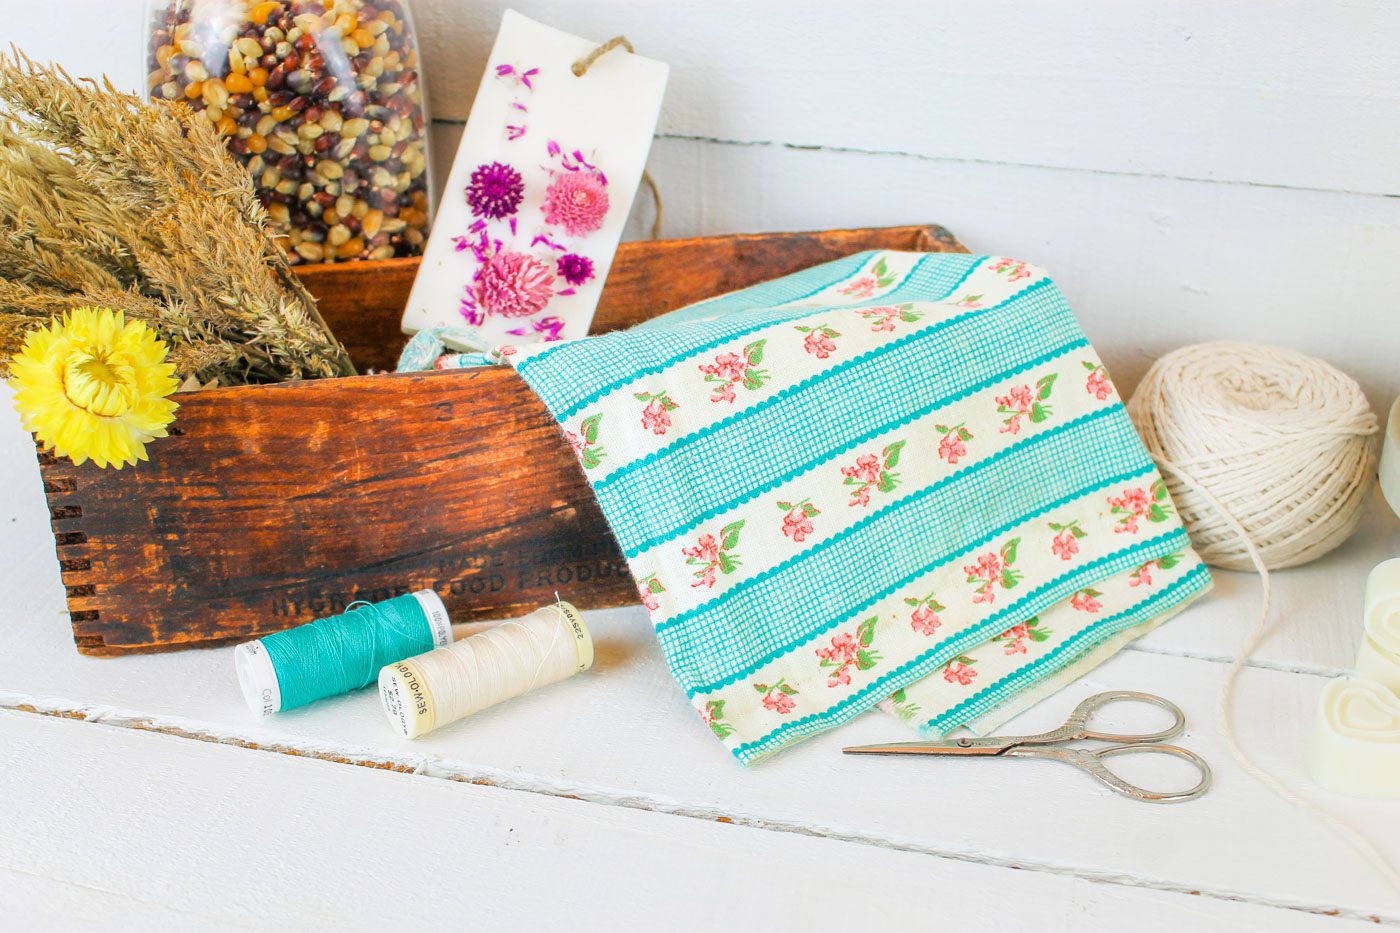 handmade gift making supplies featuring thread, dried florals, fabric and scissors